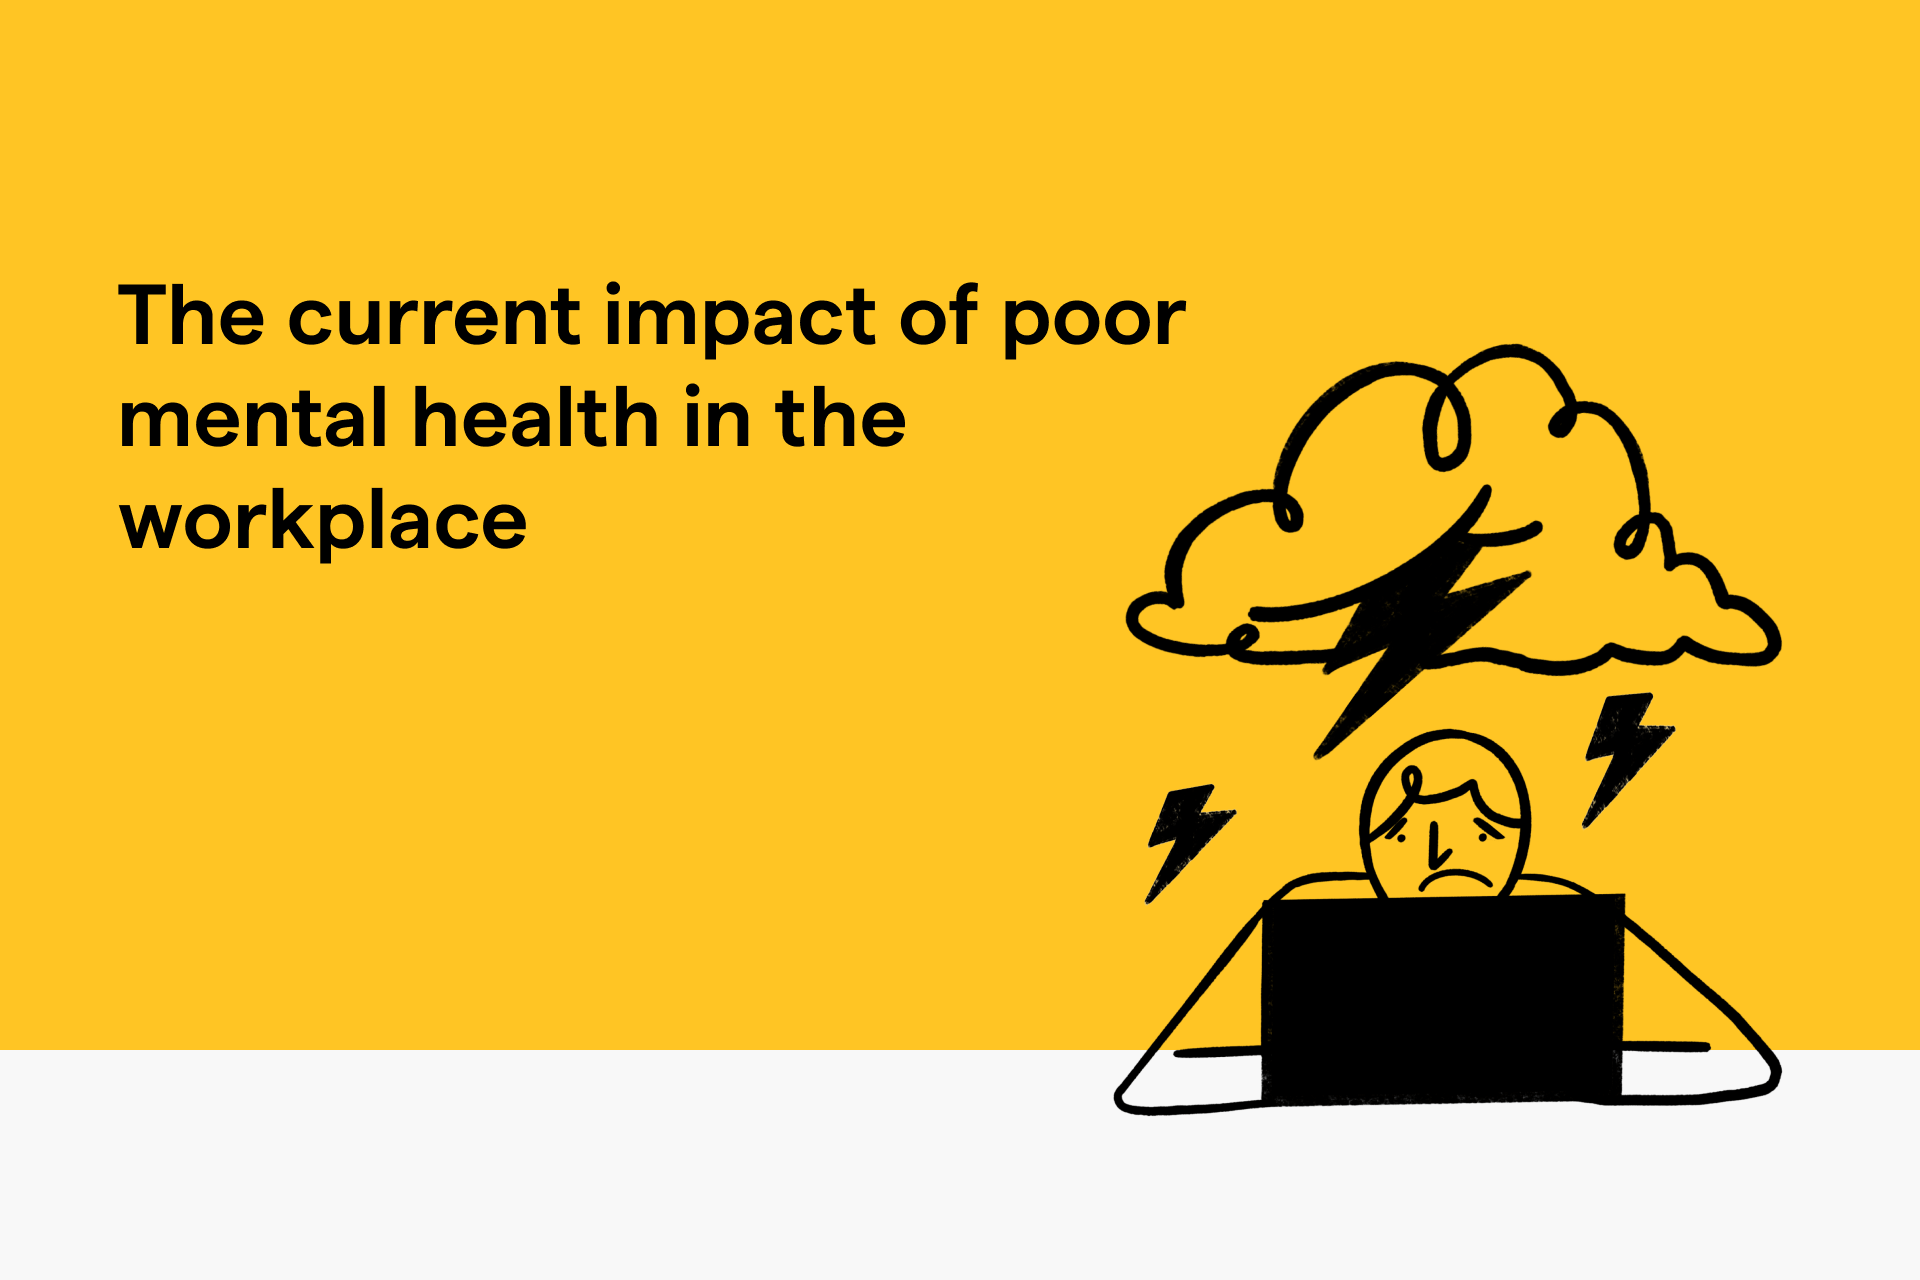 The current impact of poor mental health in the workplace